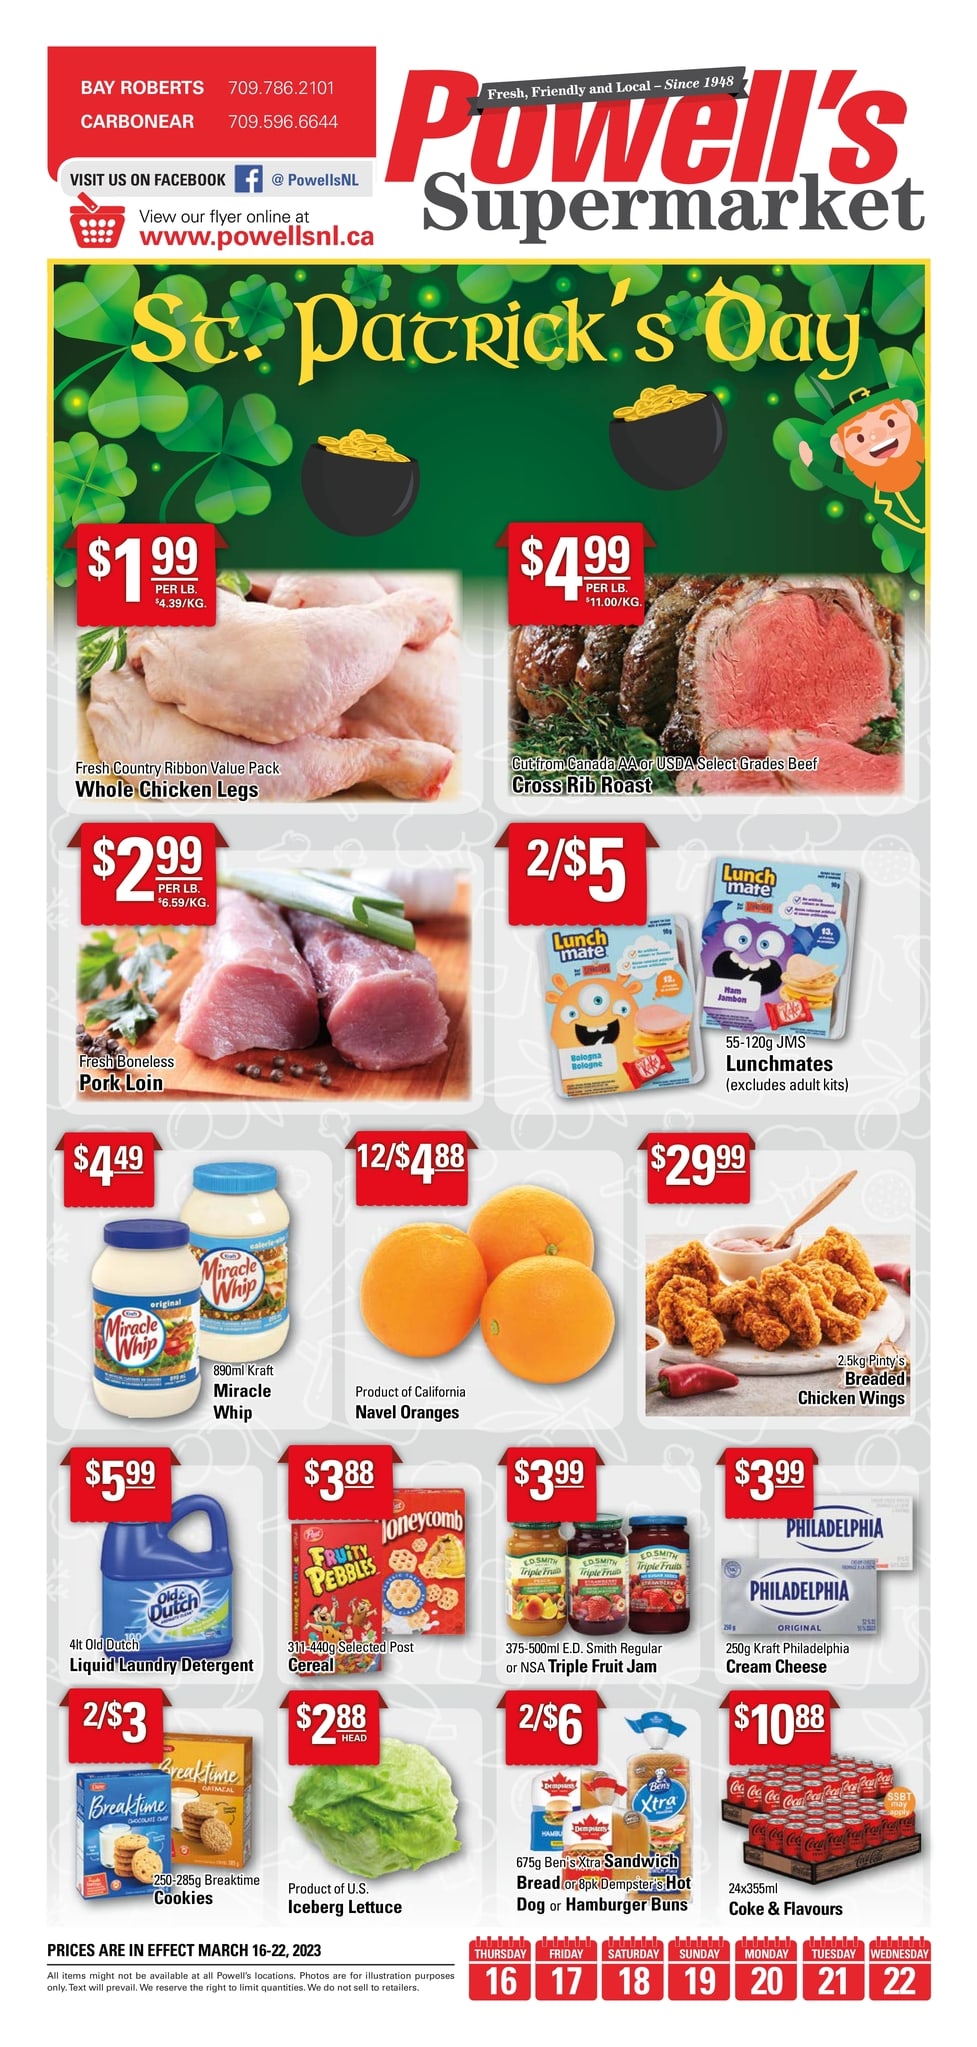 Powell's Supermarket - Weekly Flyer Specials - Page 1